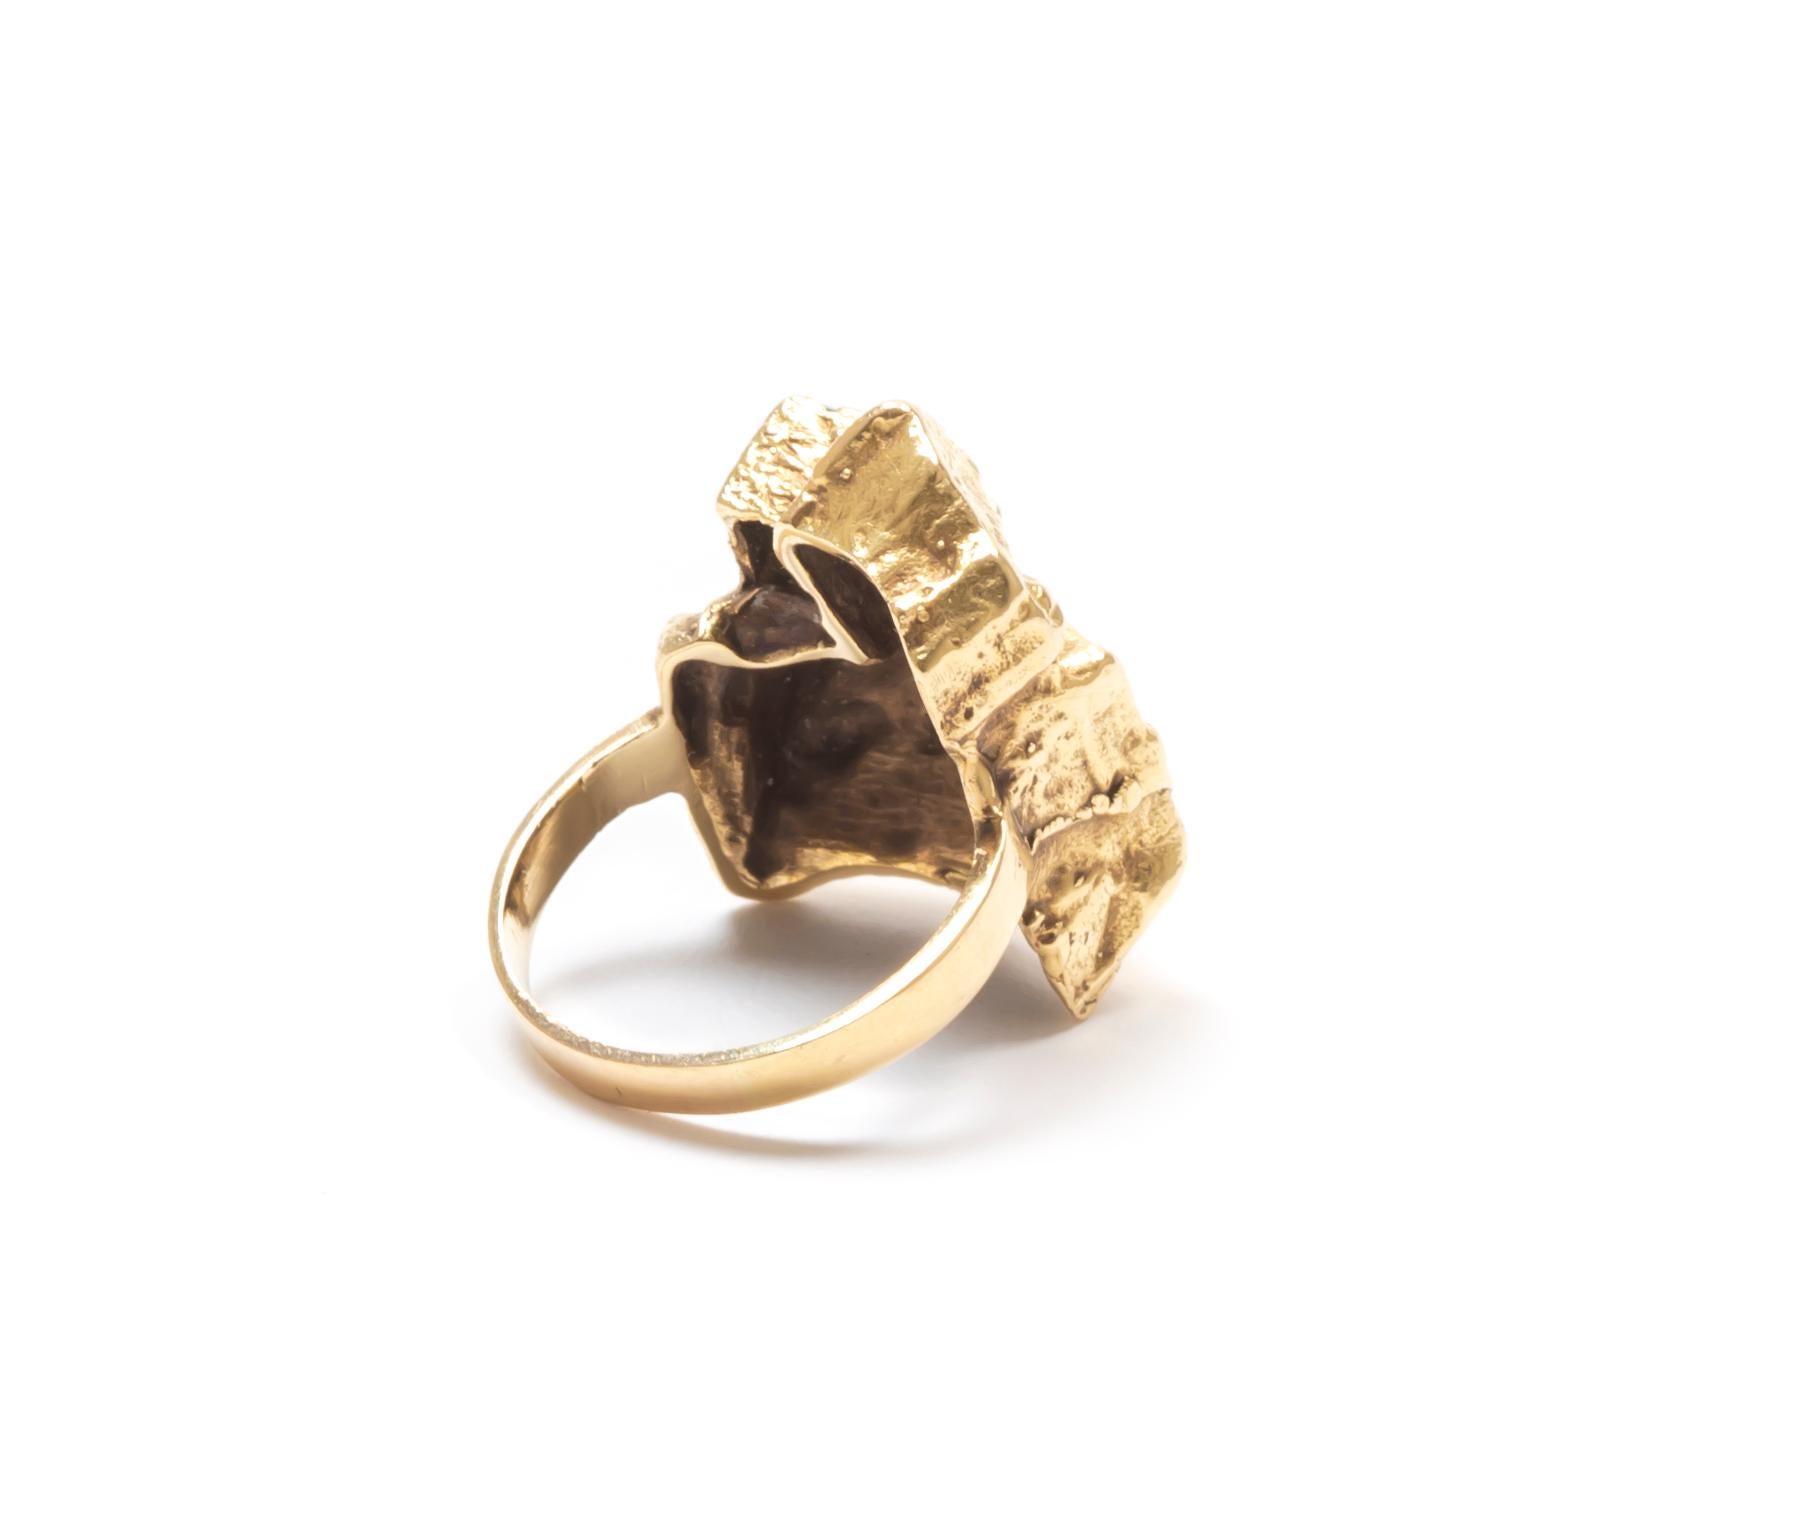 Modernist Scandinavian 1970s Yellow Gold Ring In Good Condition For Sale In Oslo, NO